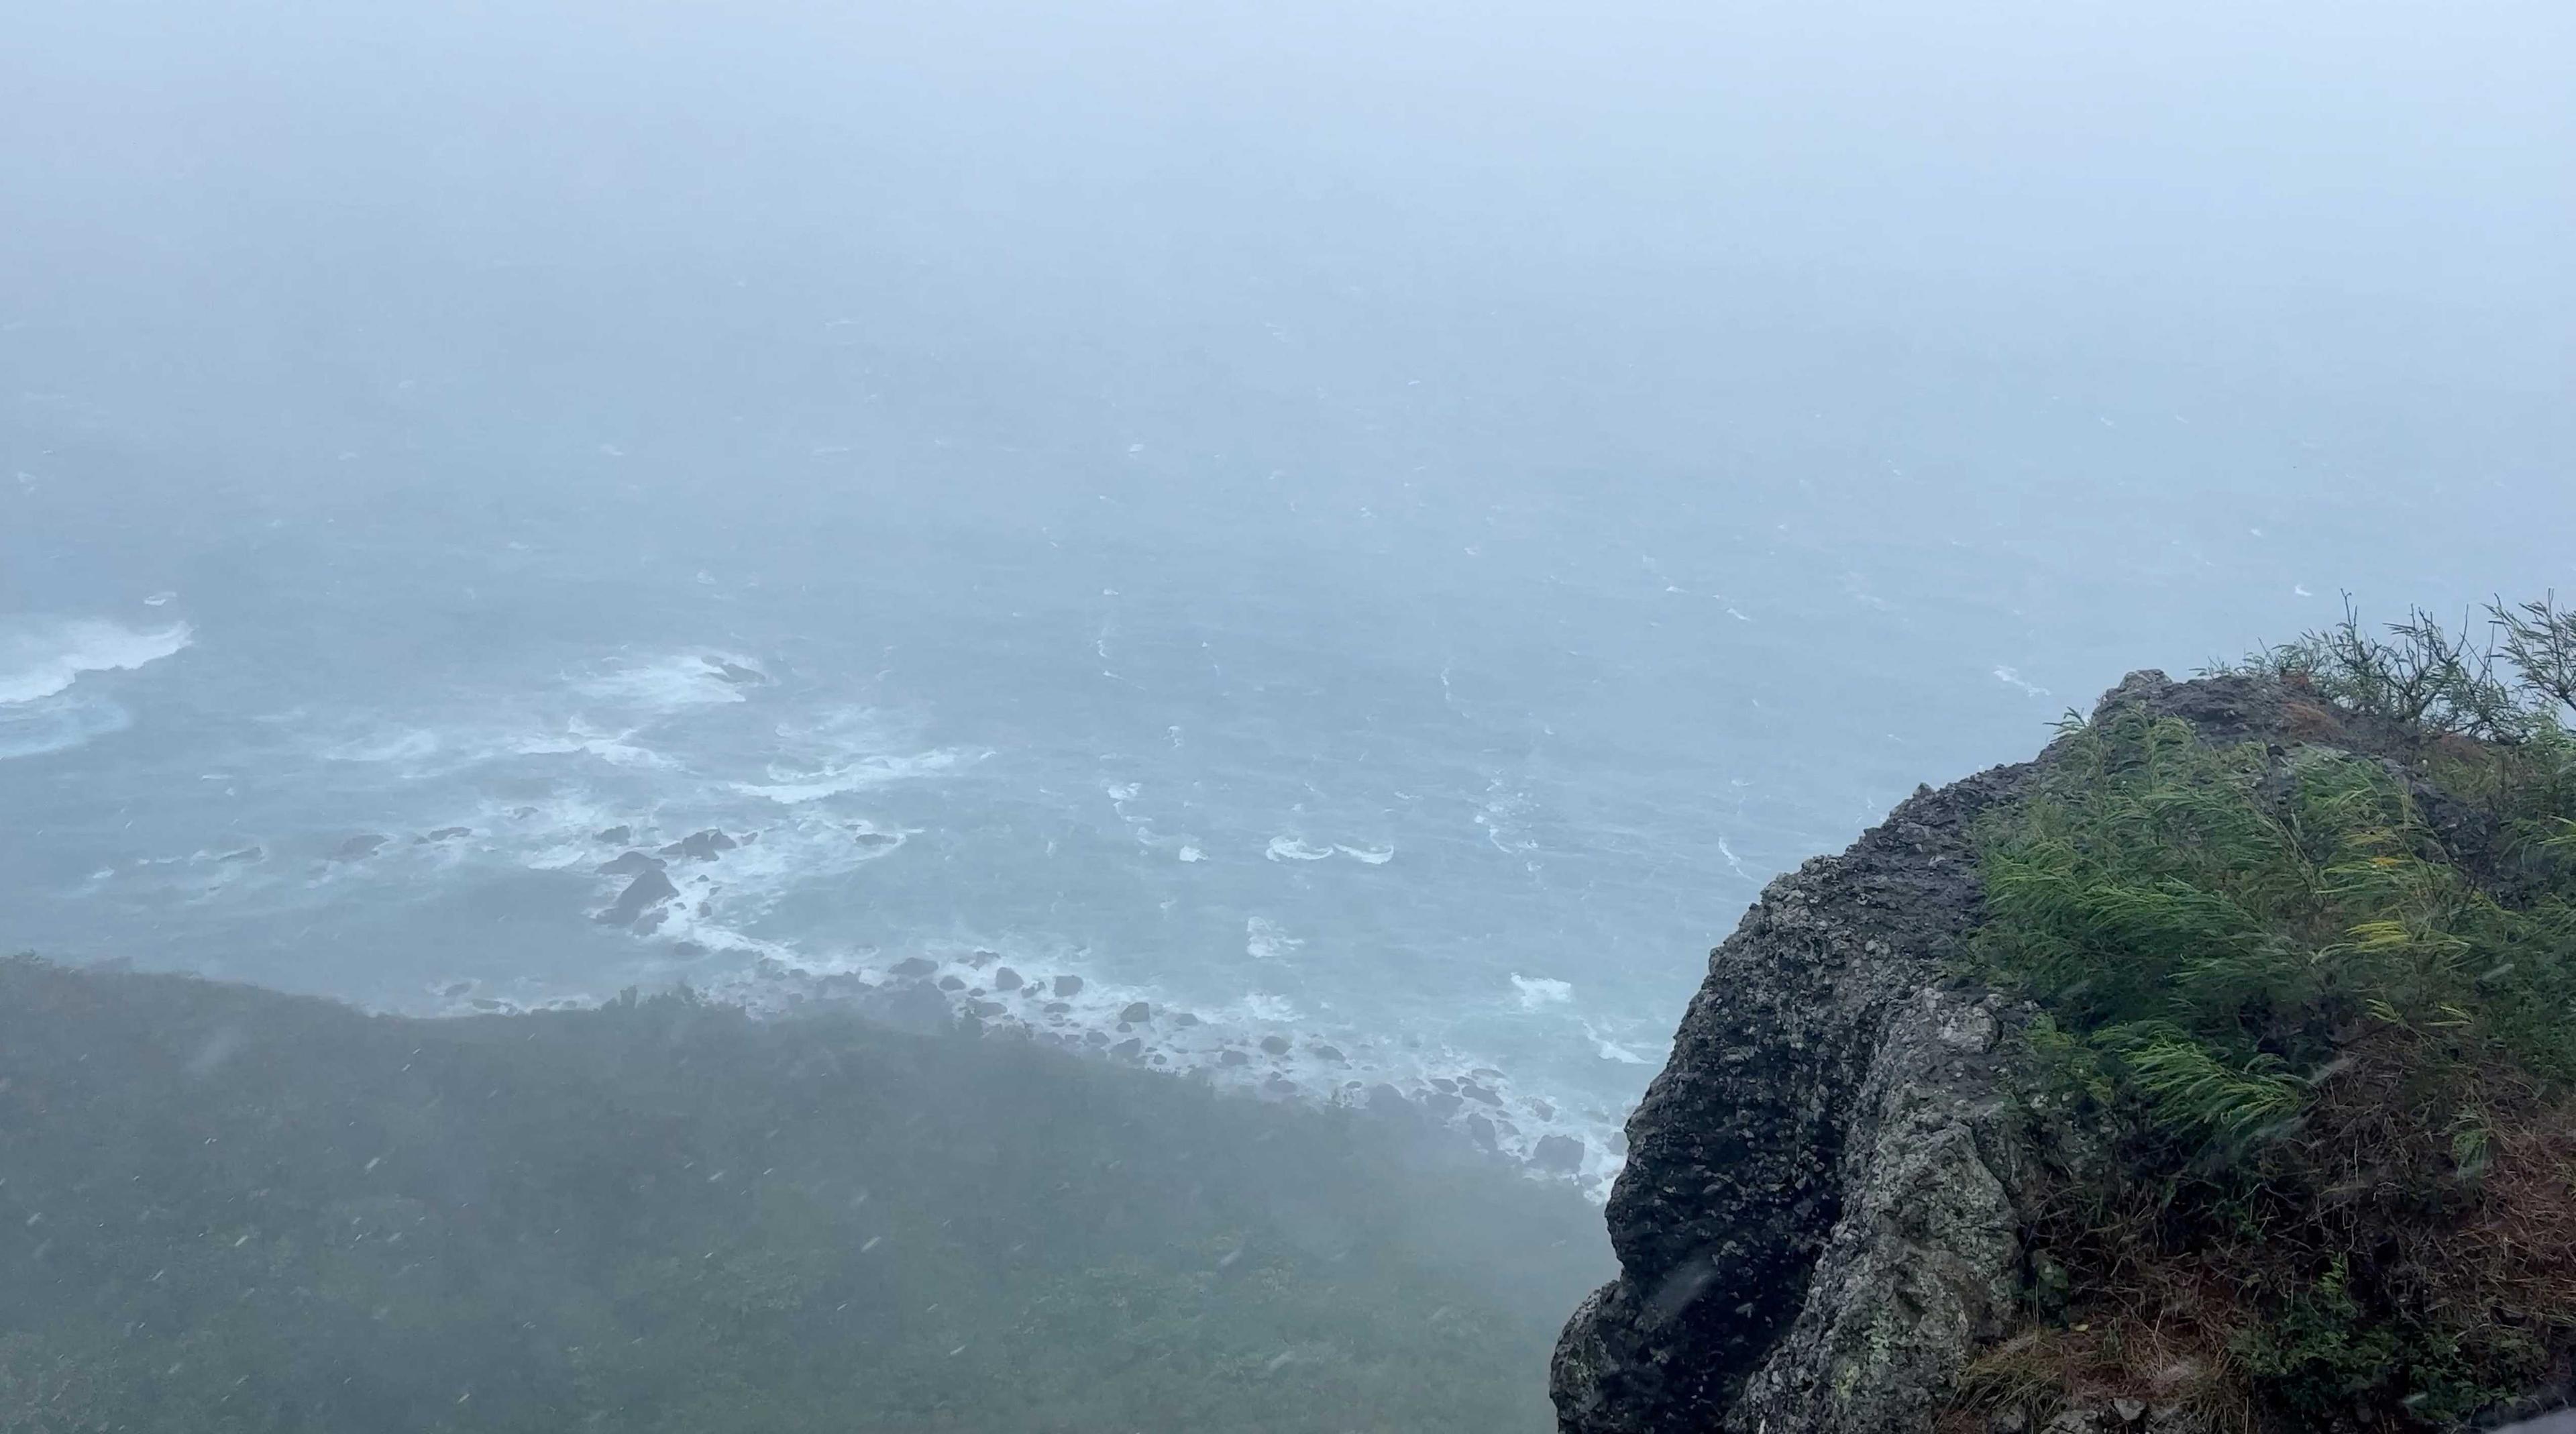 Heavy rain during Typhoon Lan as it passes over Chichijima Island in Ogasawara, Tokyo Prefecture, Japan Aug 11, in this screen grab obtained from a social media video. Photo: Reuters